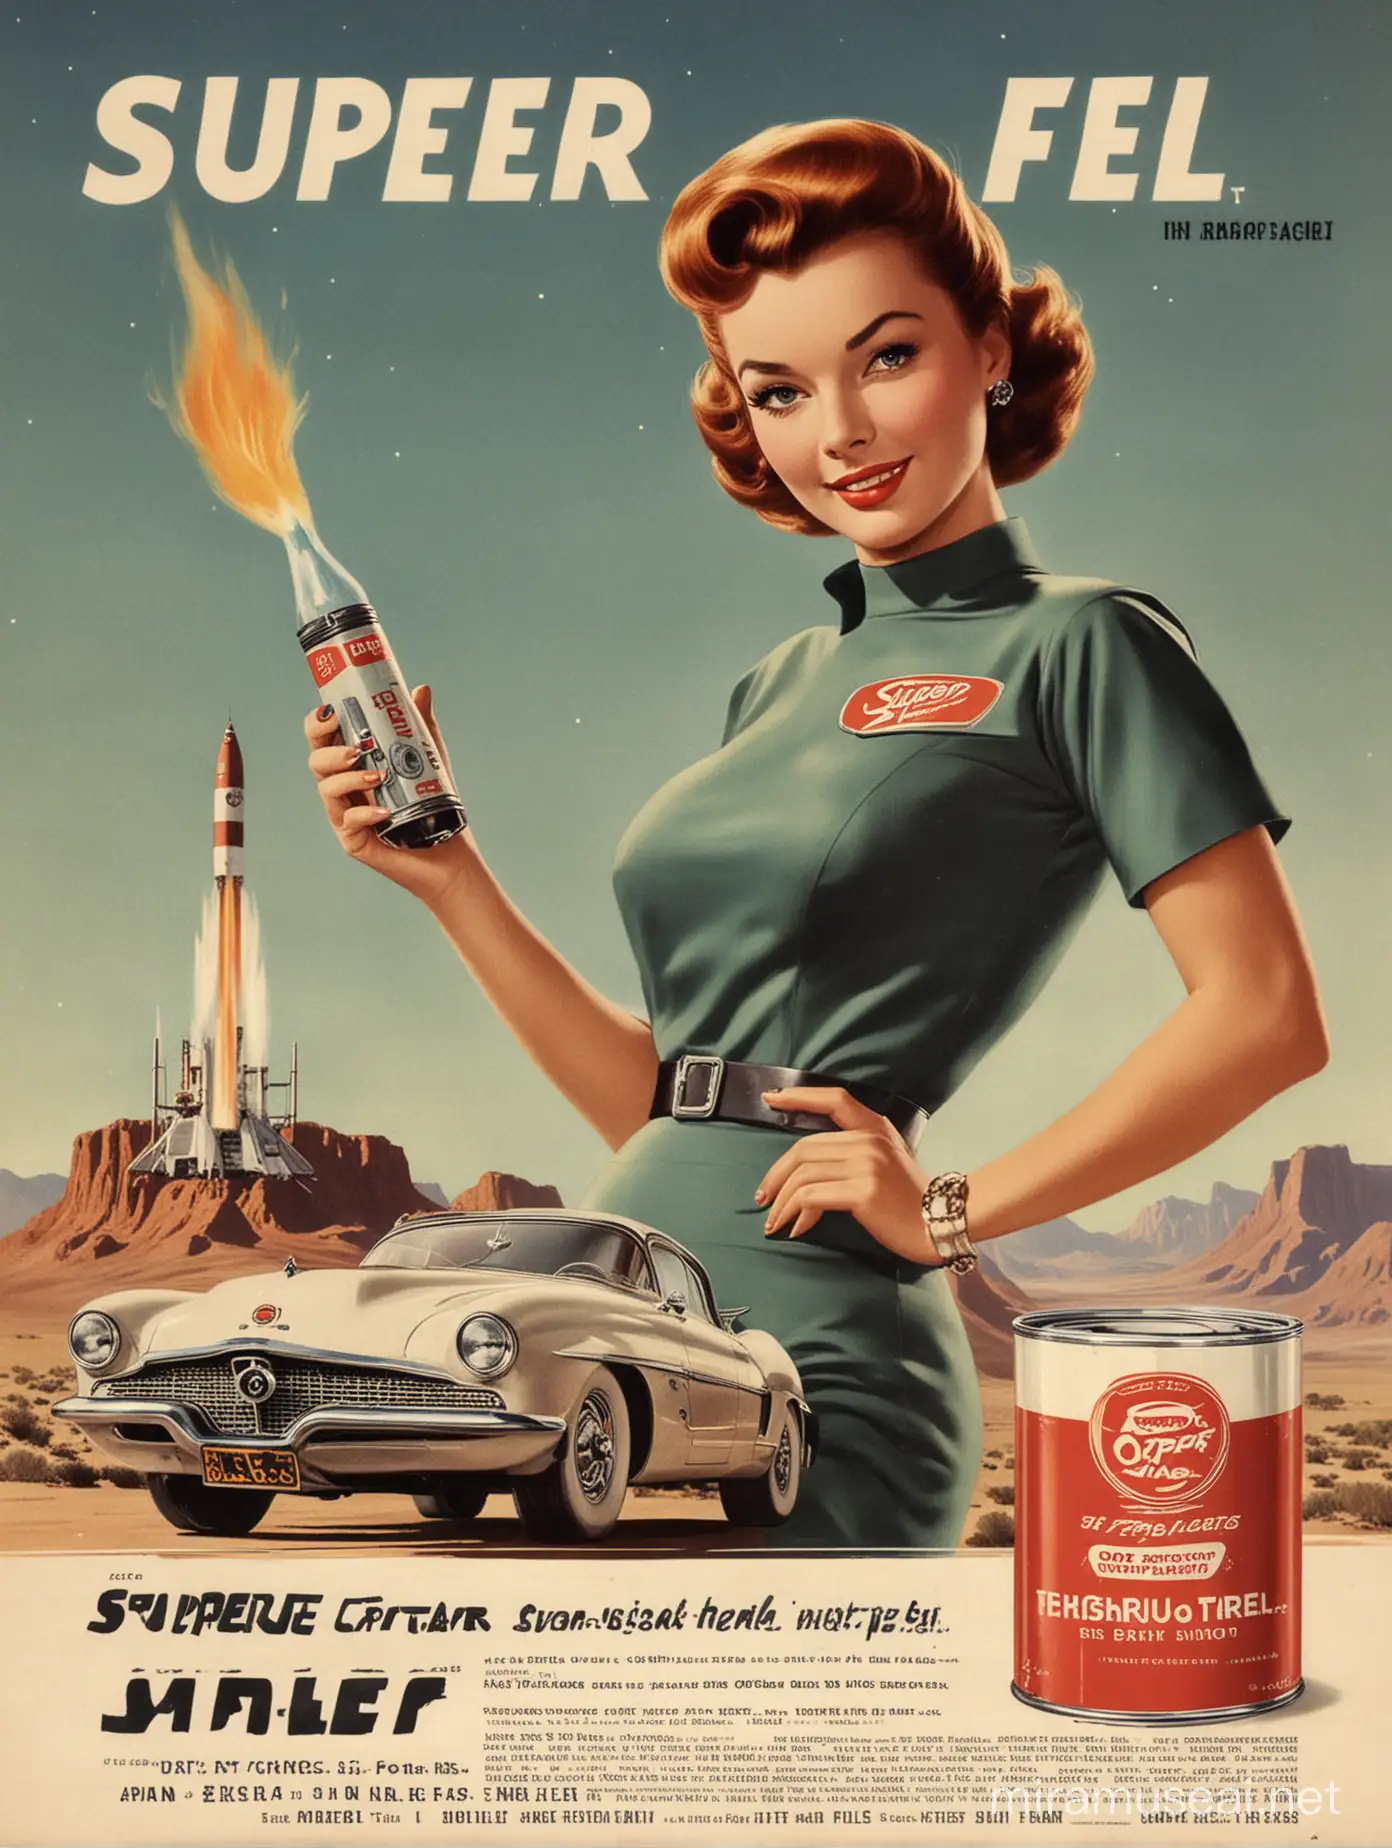 50's vintage scifi style ad for super fuel